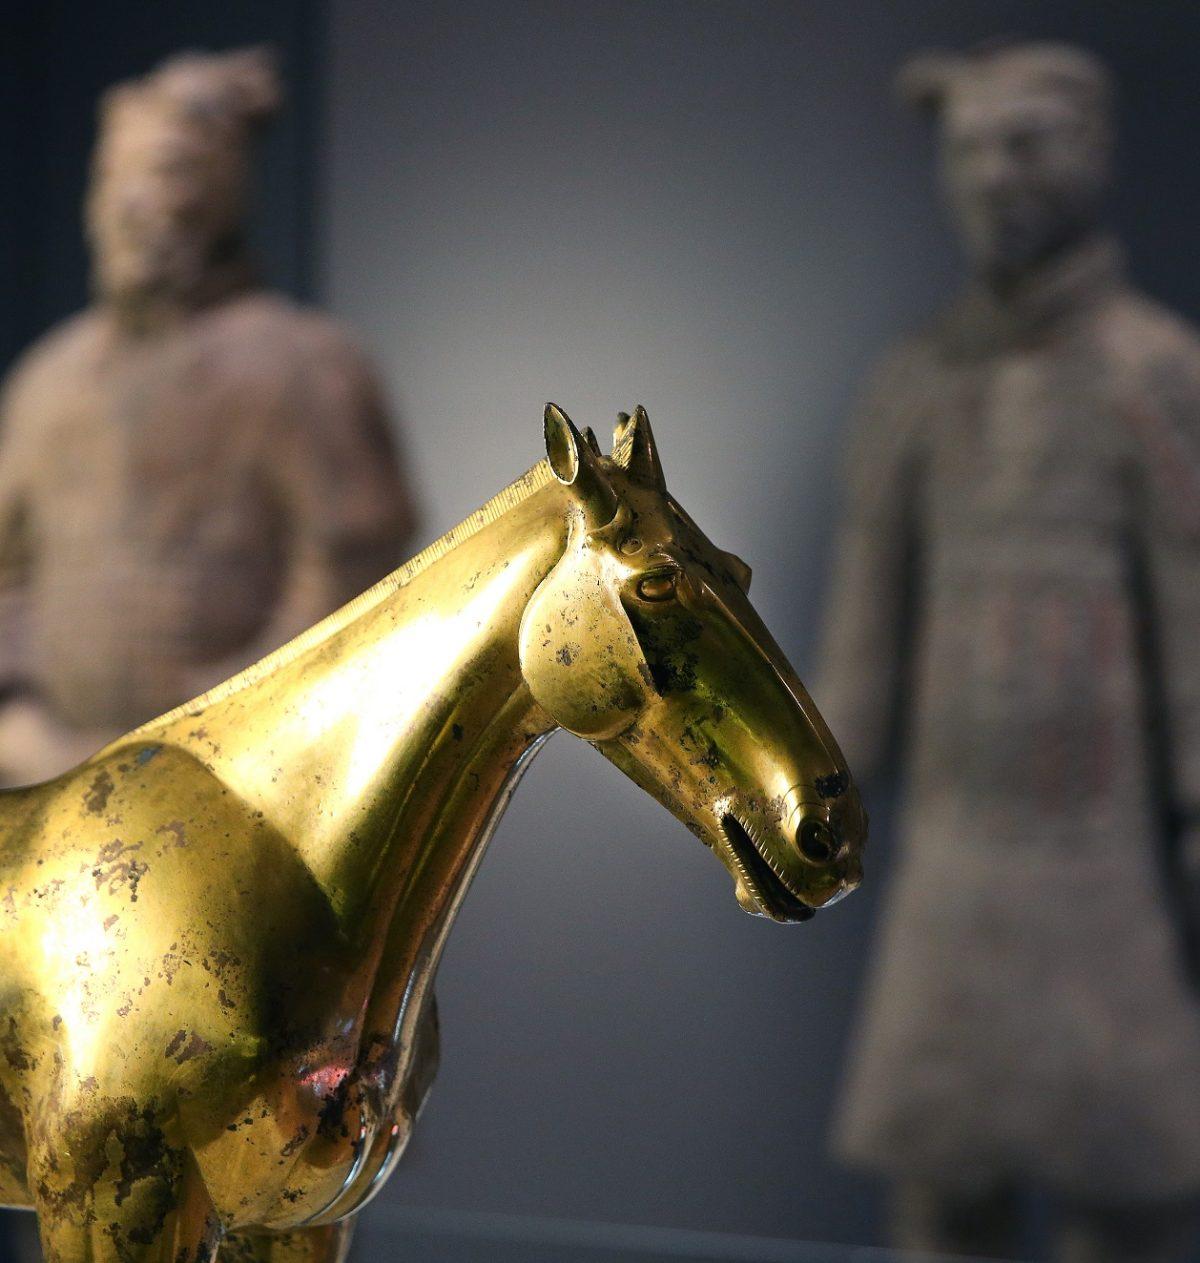 The sleek contours of the "Golden Horse of Maoling," thought to be based on the horses that Emperor Wu imported from Uzbekistan and Kyrgyzstan. (Gareth Jones)